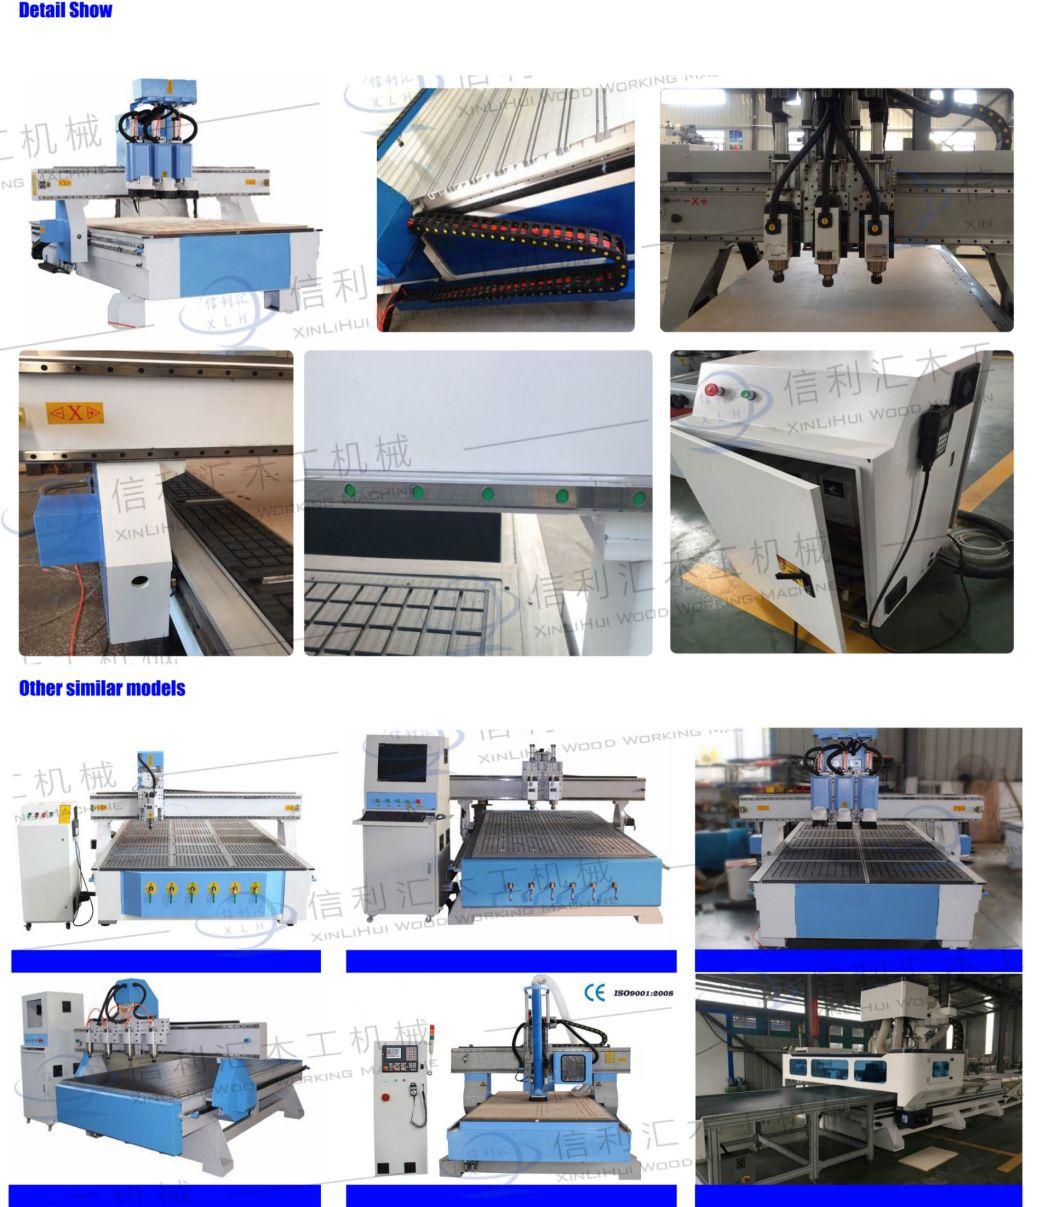 3 Axis Vertical CNC Cutting Milling Drilling Machine Tool Center, Precision Horizontal Flat Bed Wood Automatic CNC Lathe Machine